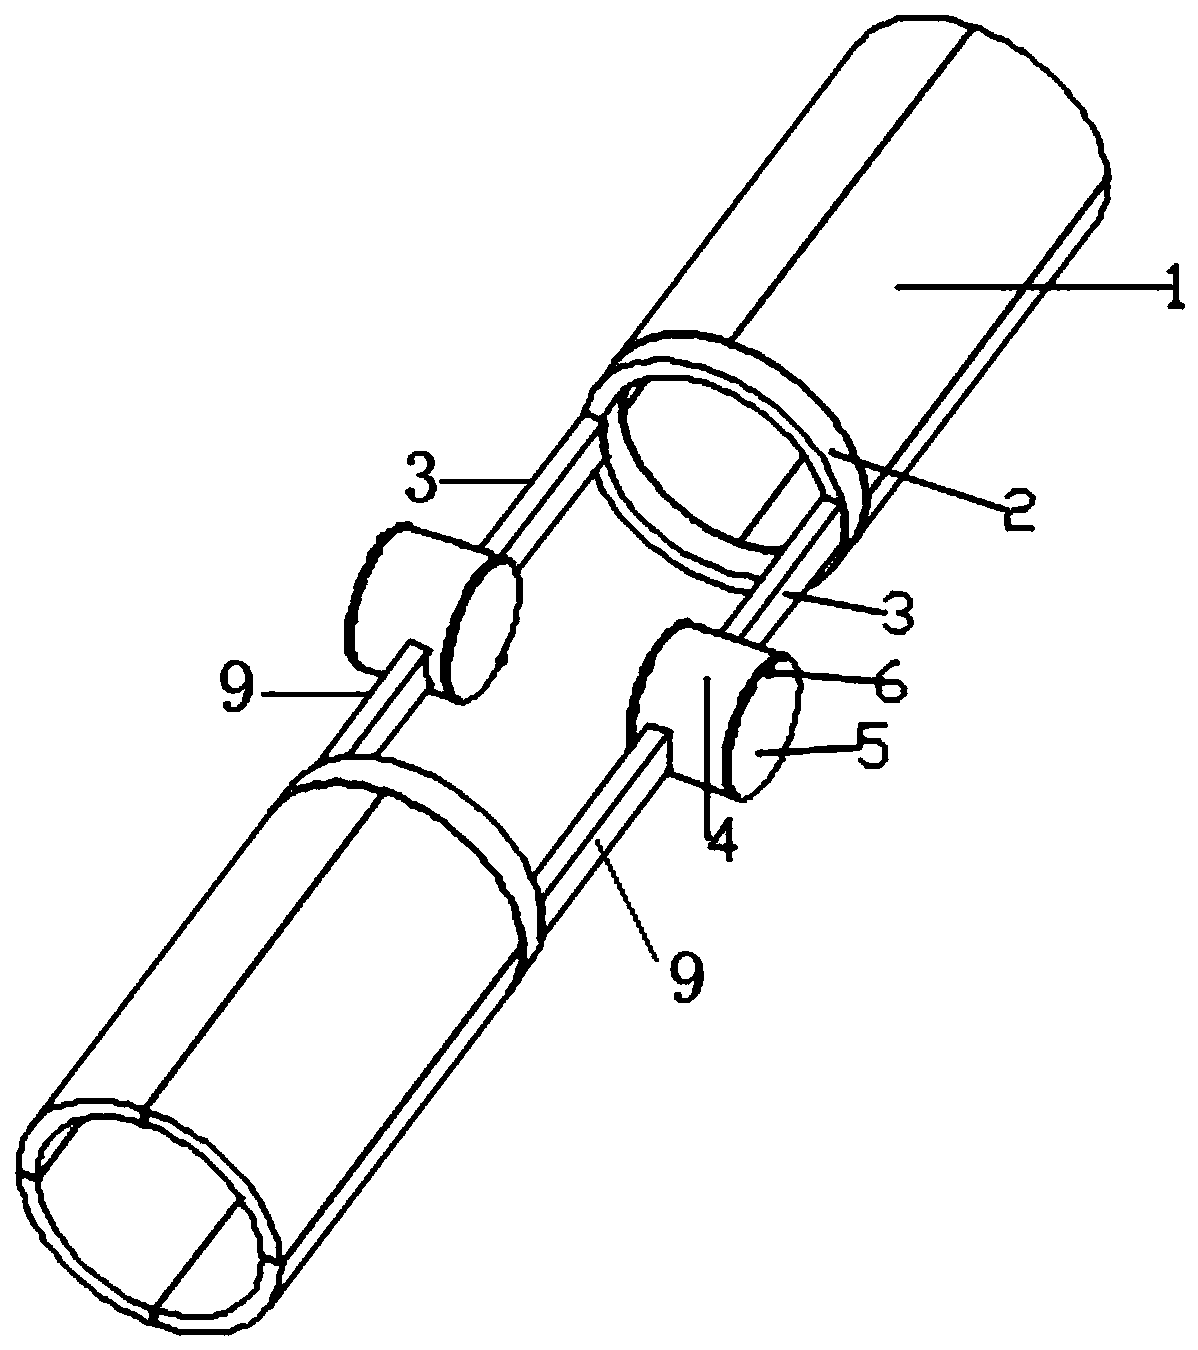 Bone joint motion rehabilitation assistance device and method